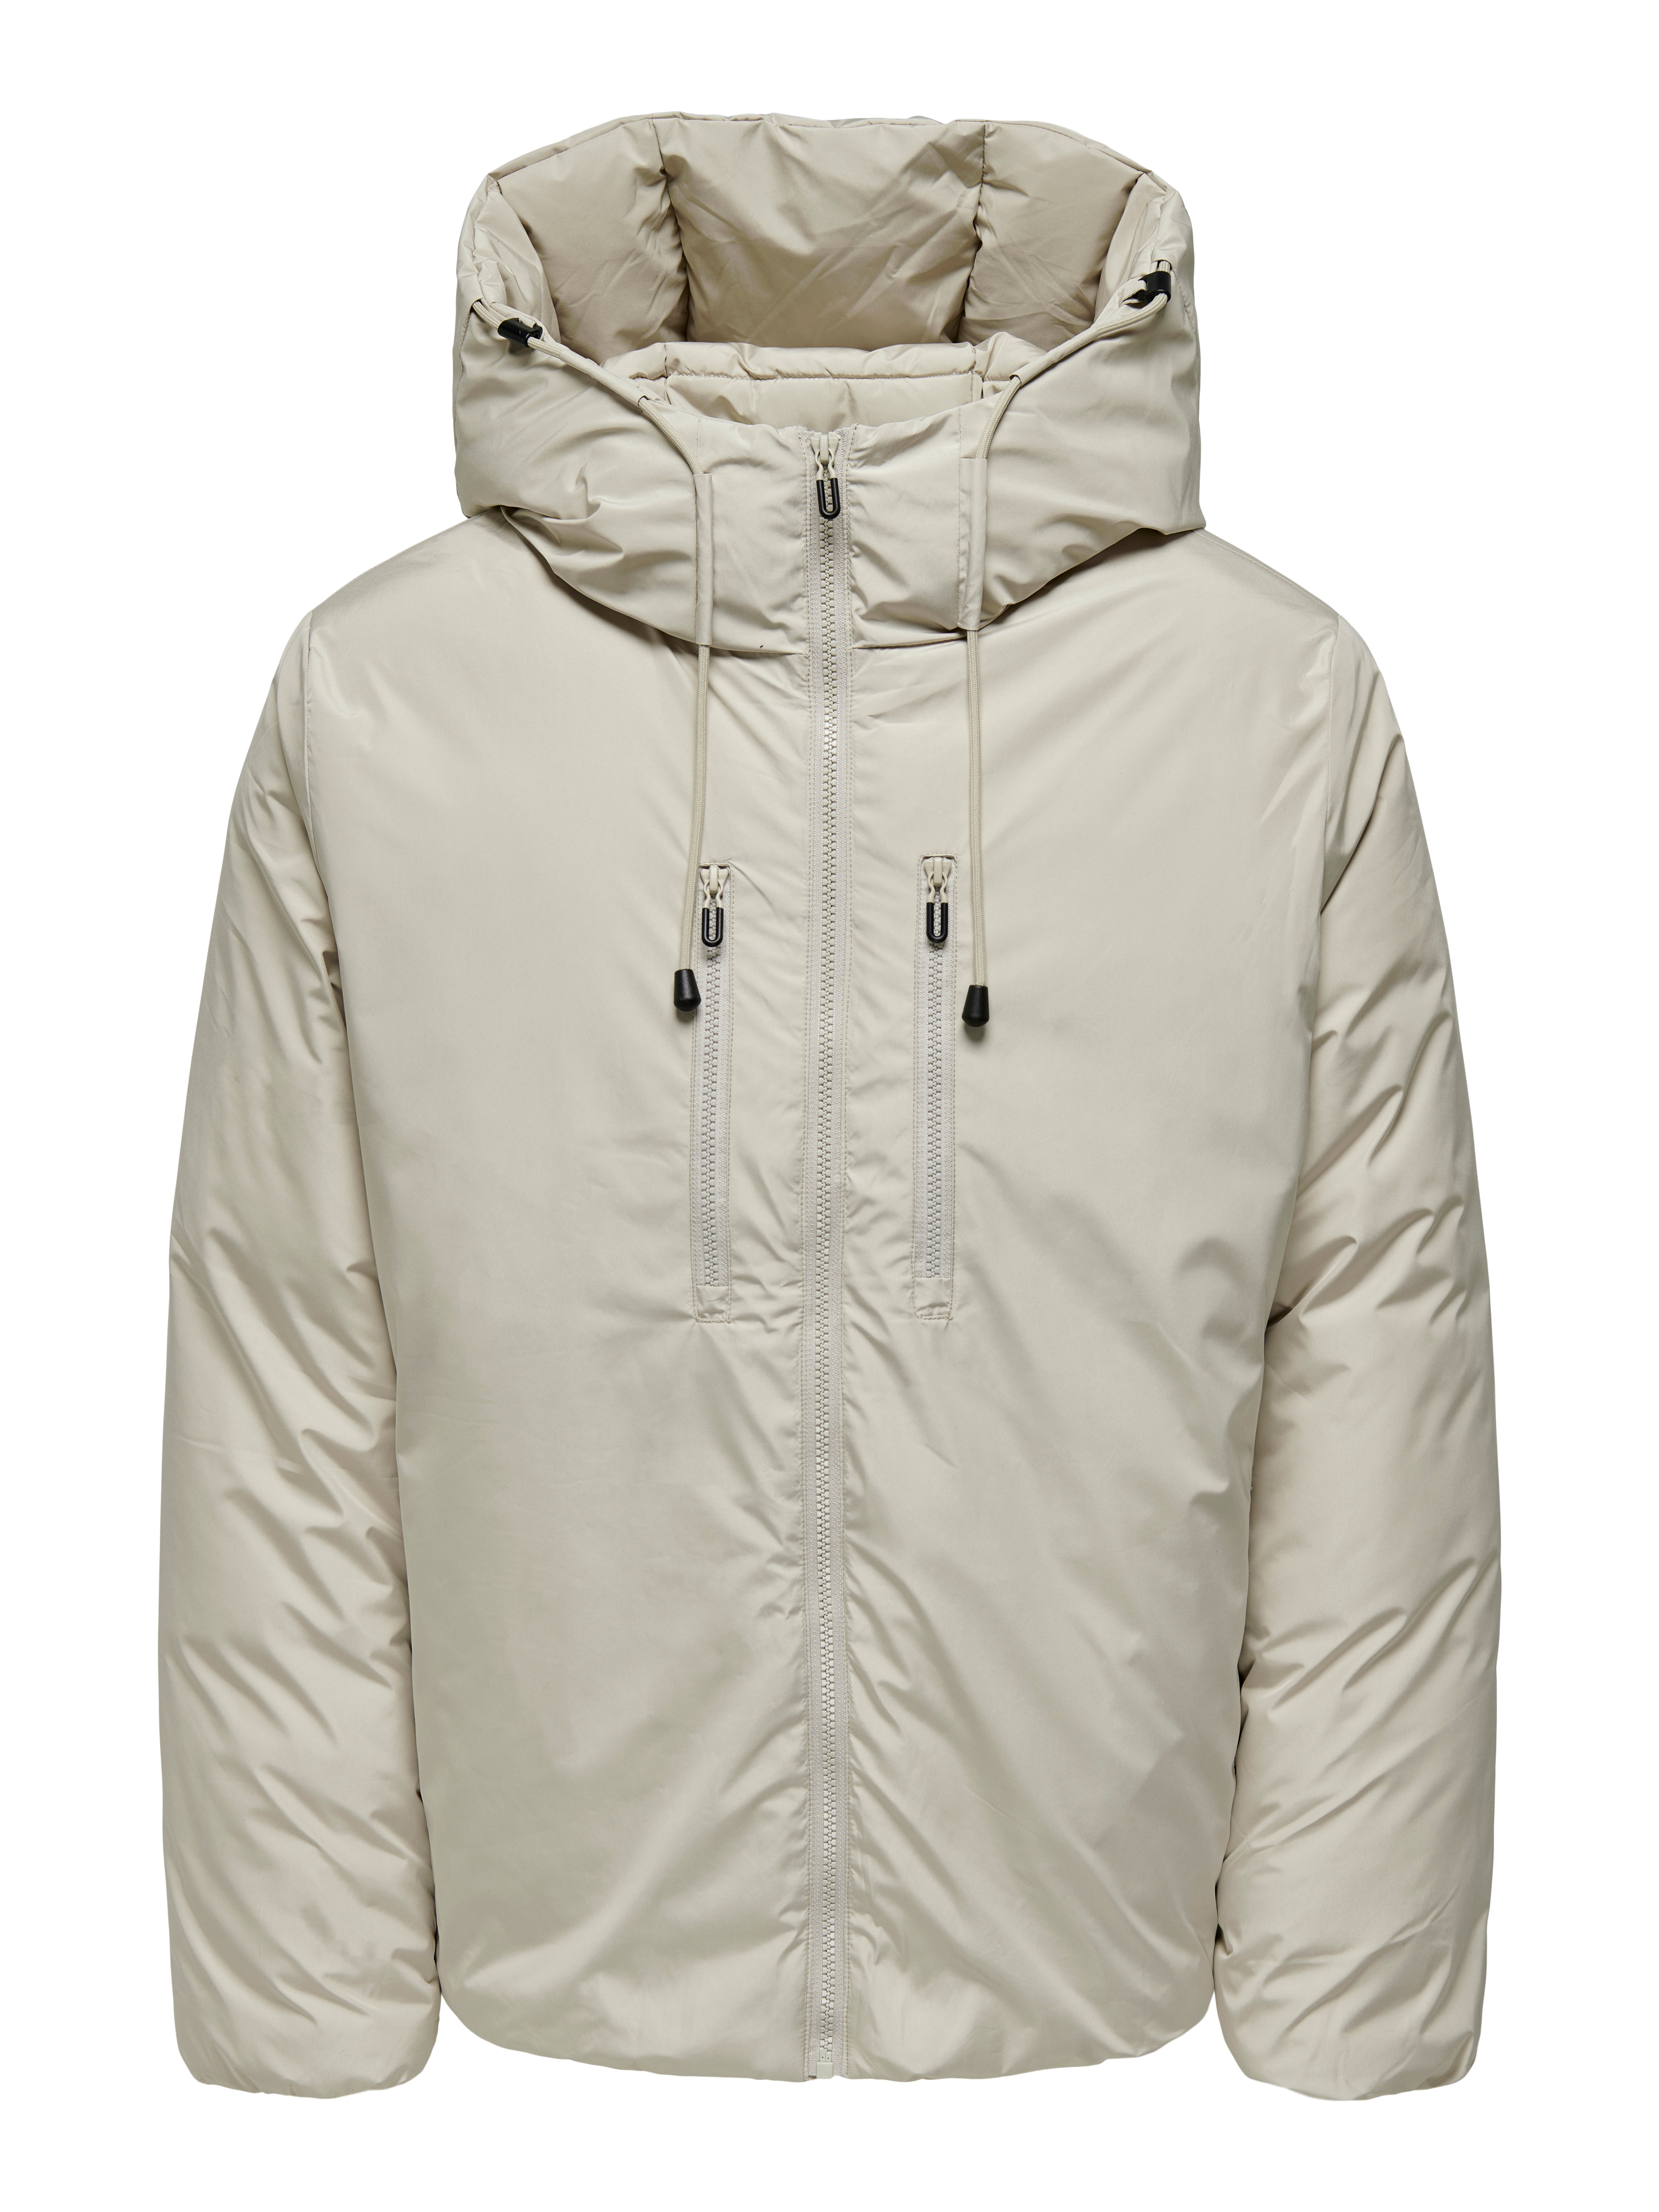 Hood with string regulation Jacket | Light Grey | ONLY & SONS®